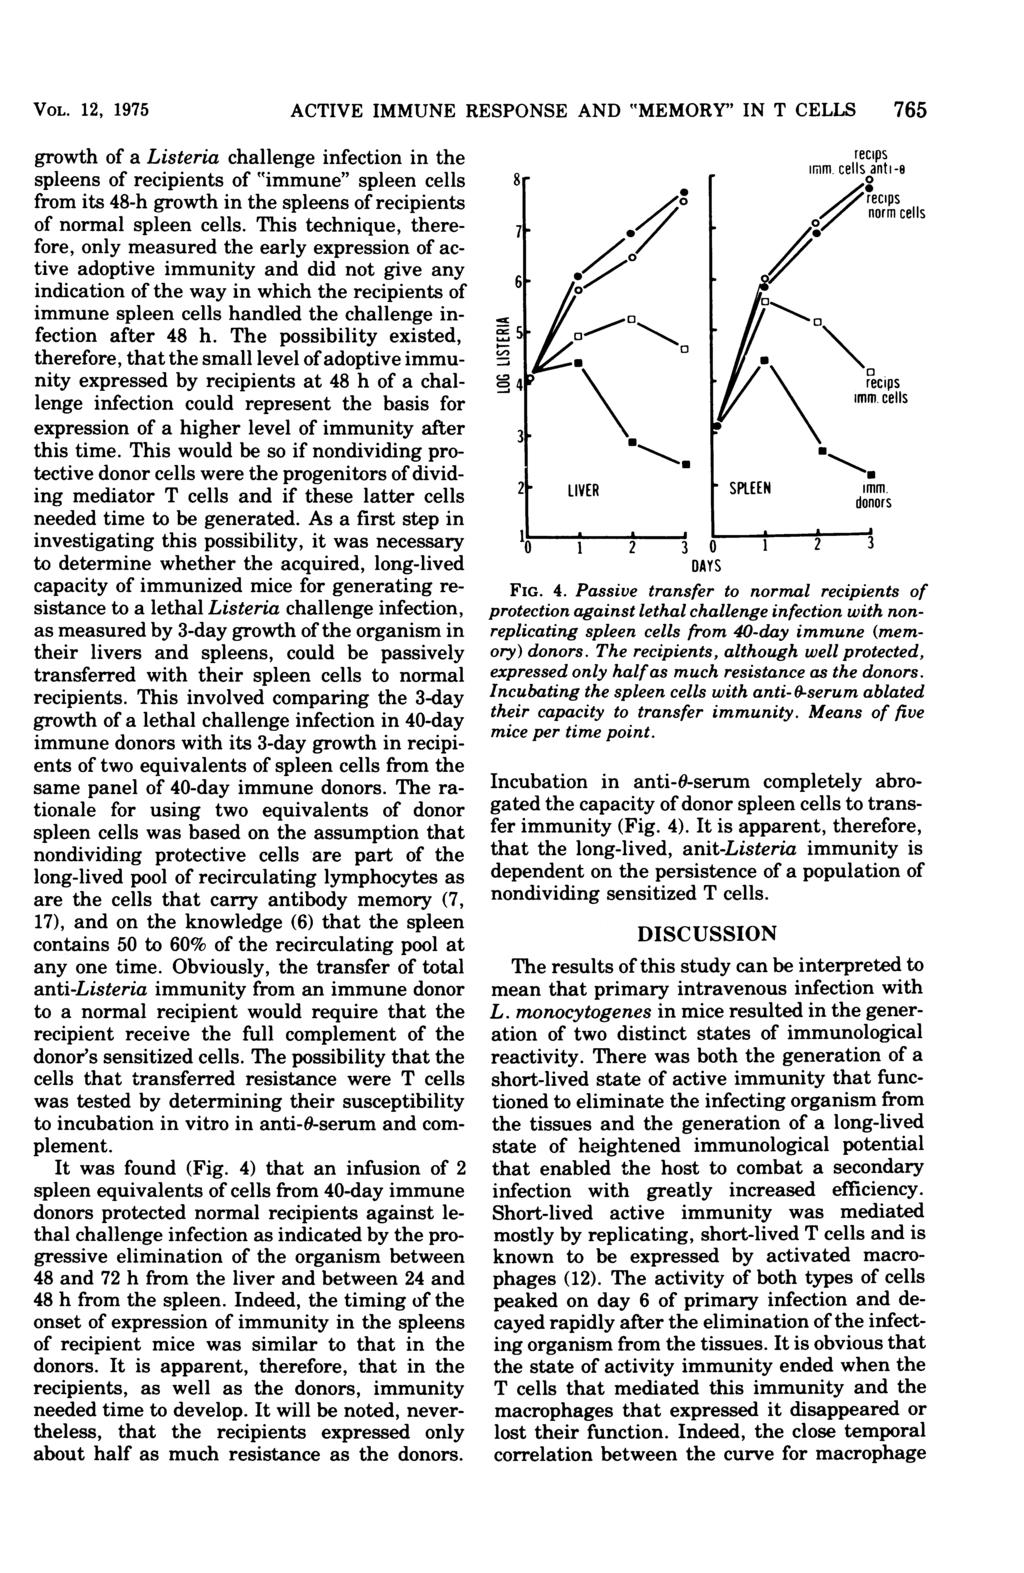 VOL. 12, 1975 ACTIVE IMMUNE RESPONSE AND "MEMORY" IN T CELLS 765 growth of a Listeria challenge infection in the spleens of recipients of "immune" spleen cells from its 48-h growth in the spleens of